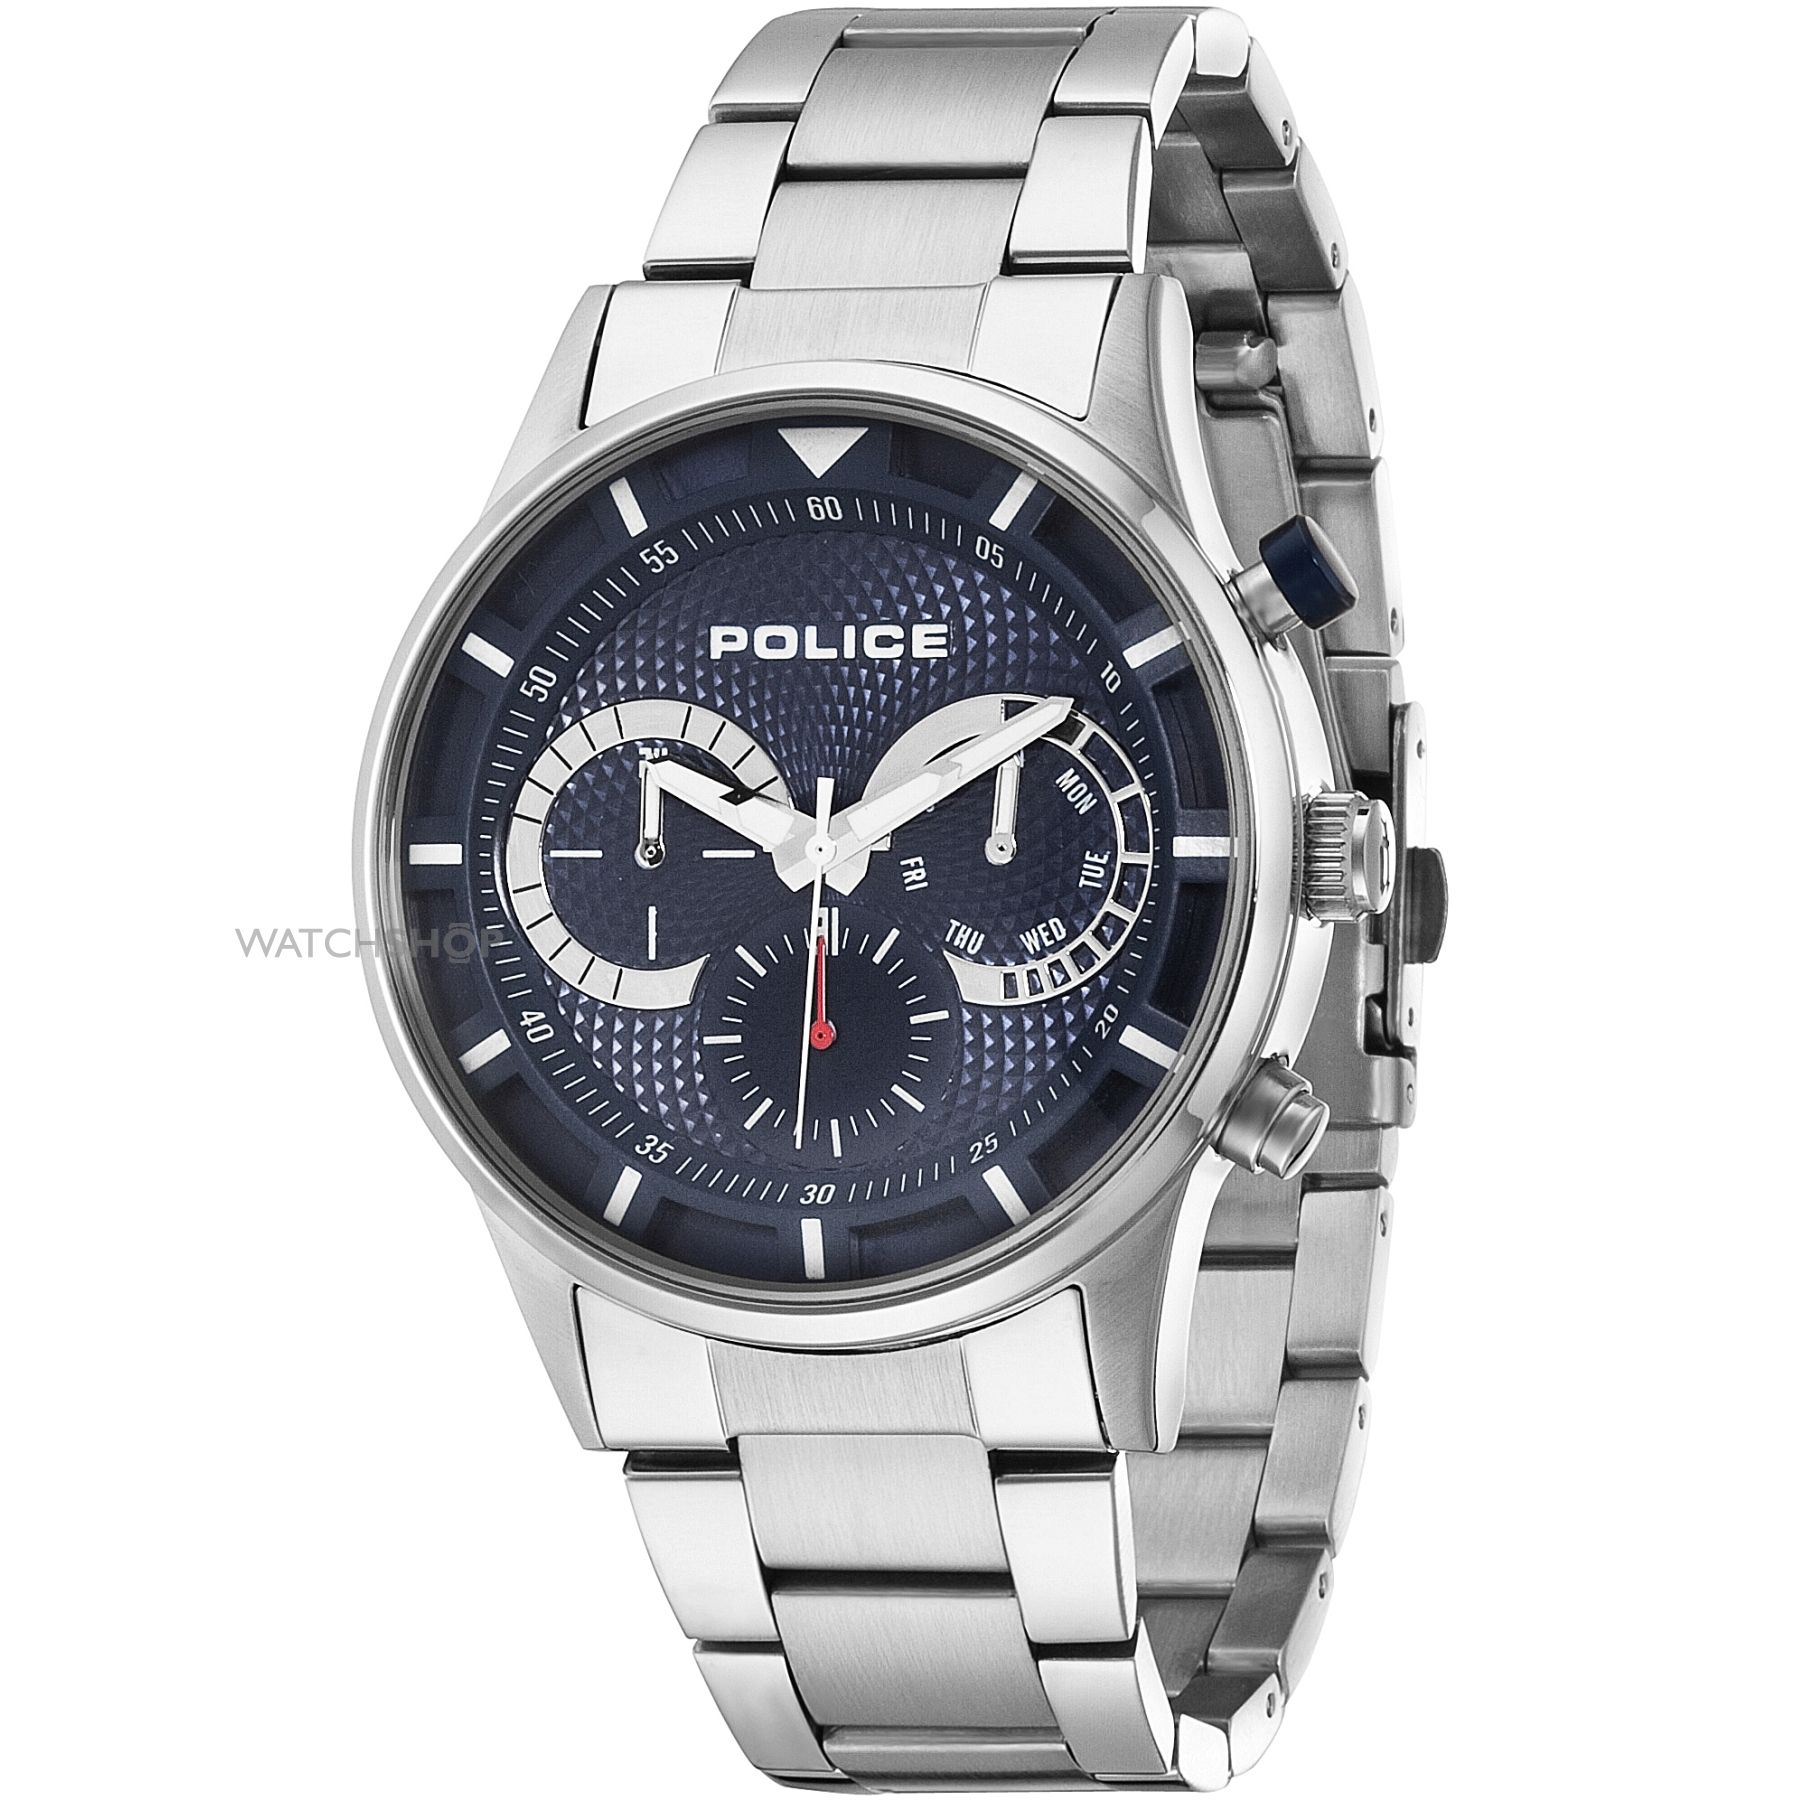 8 Most Popular Police Watches Under £100 For Men - The Watch Blog